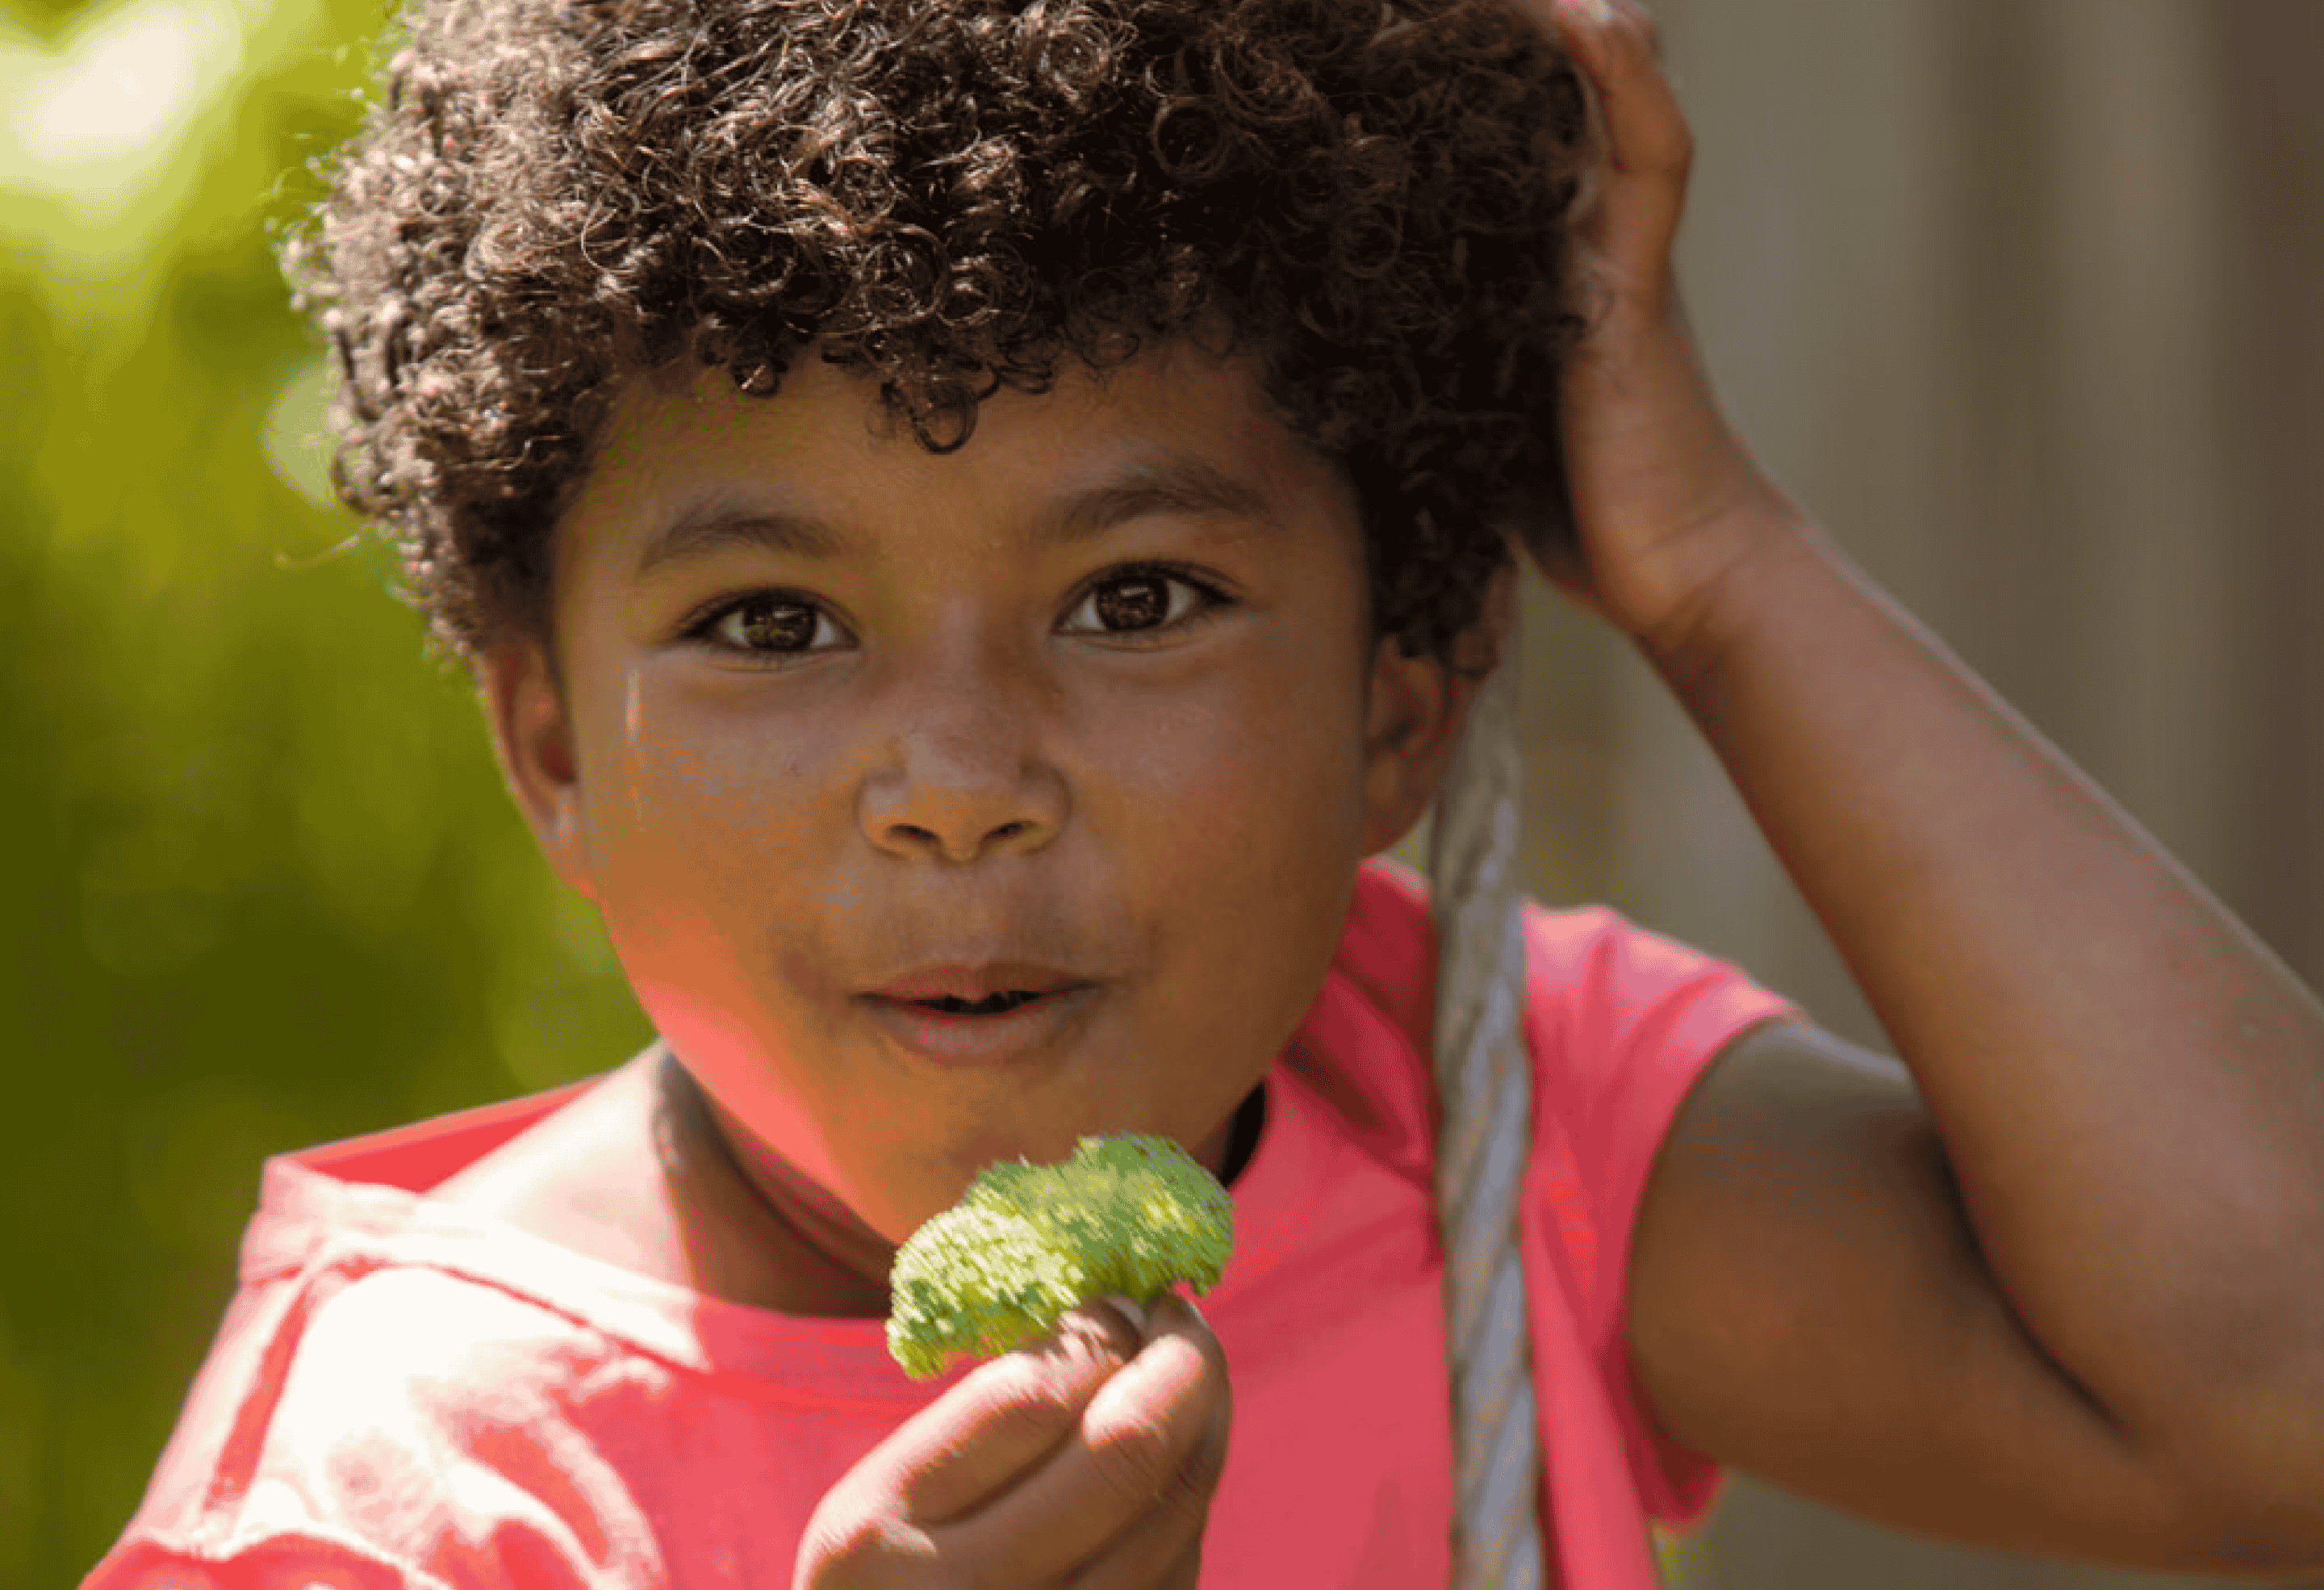 calavo-growers-fruits-vegetables-child-eating-brocolli